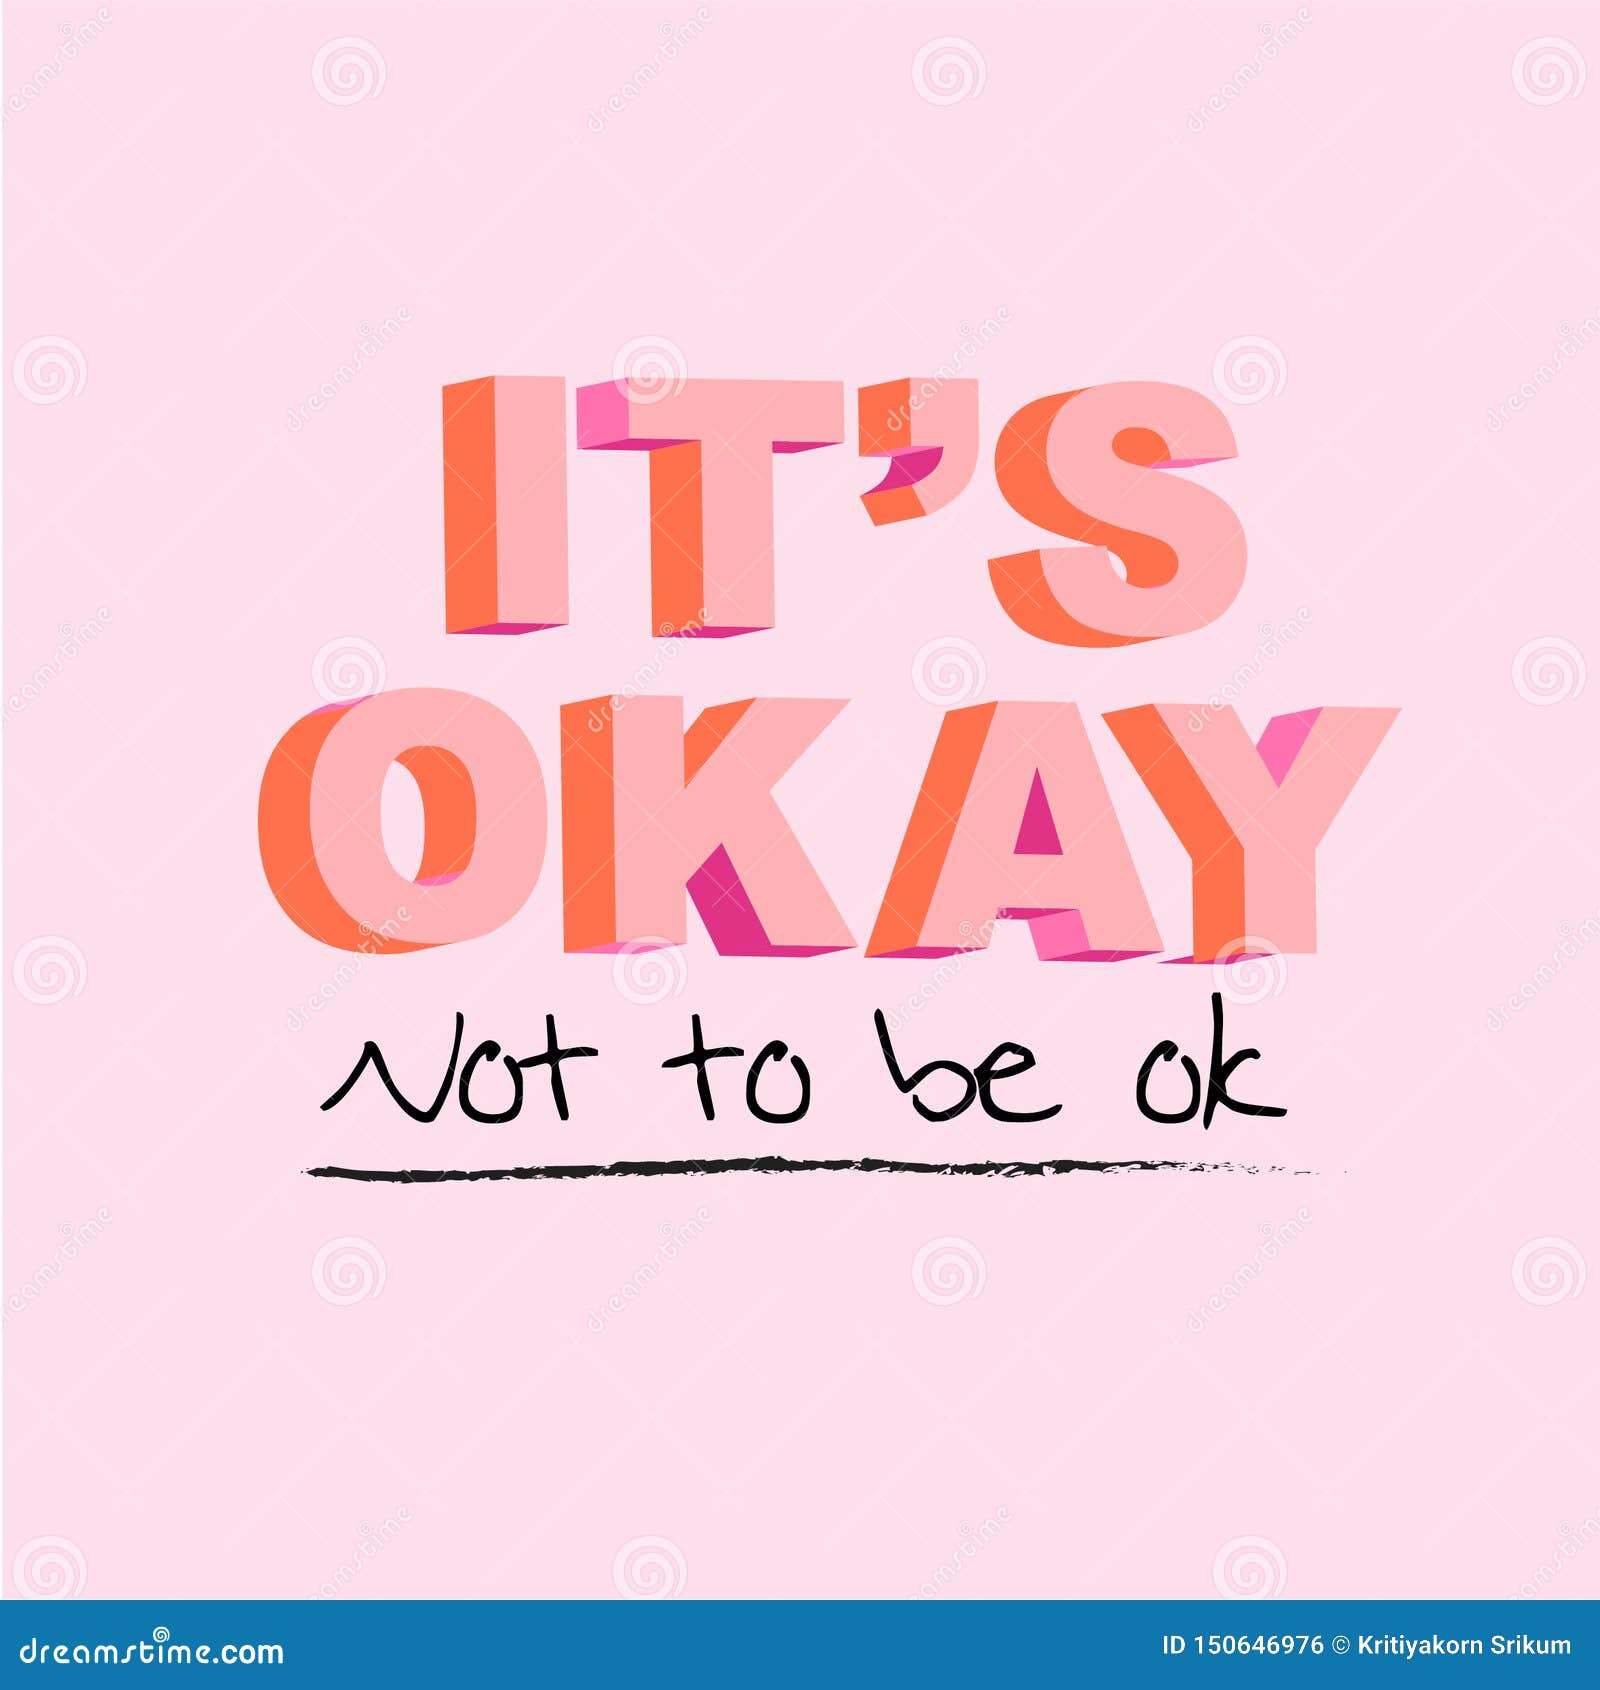 typo play in  postive quote or slogan Ã¢â¬Å itÃ¢â¬â¢s okay not to be ok